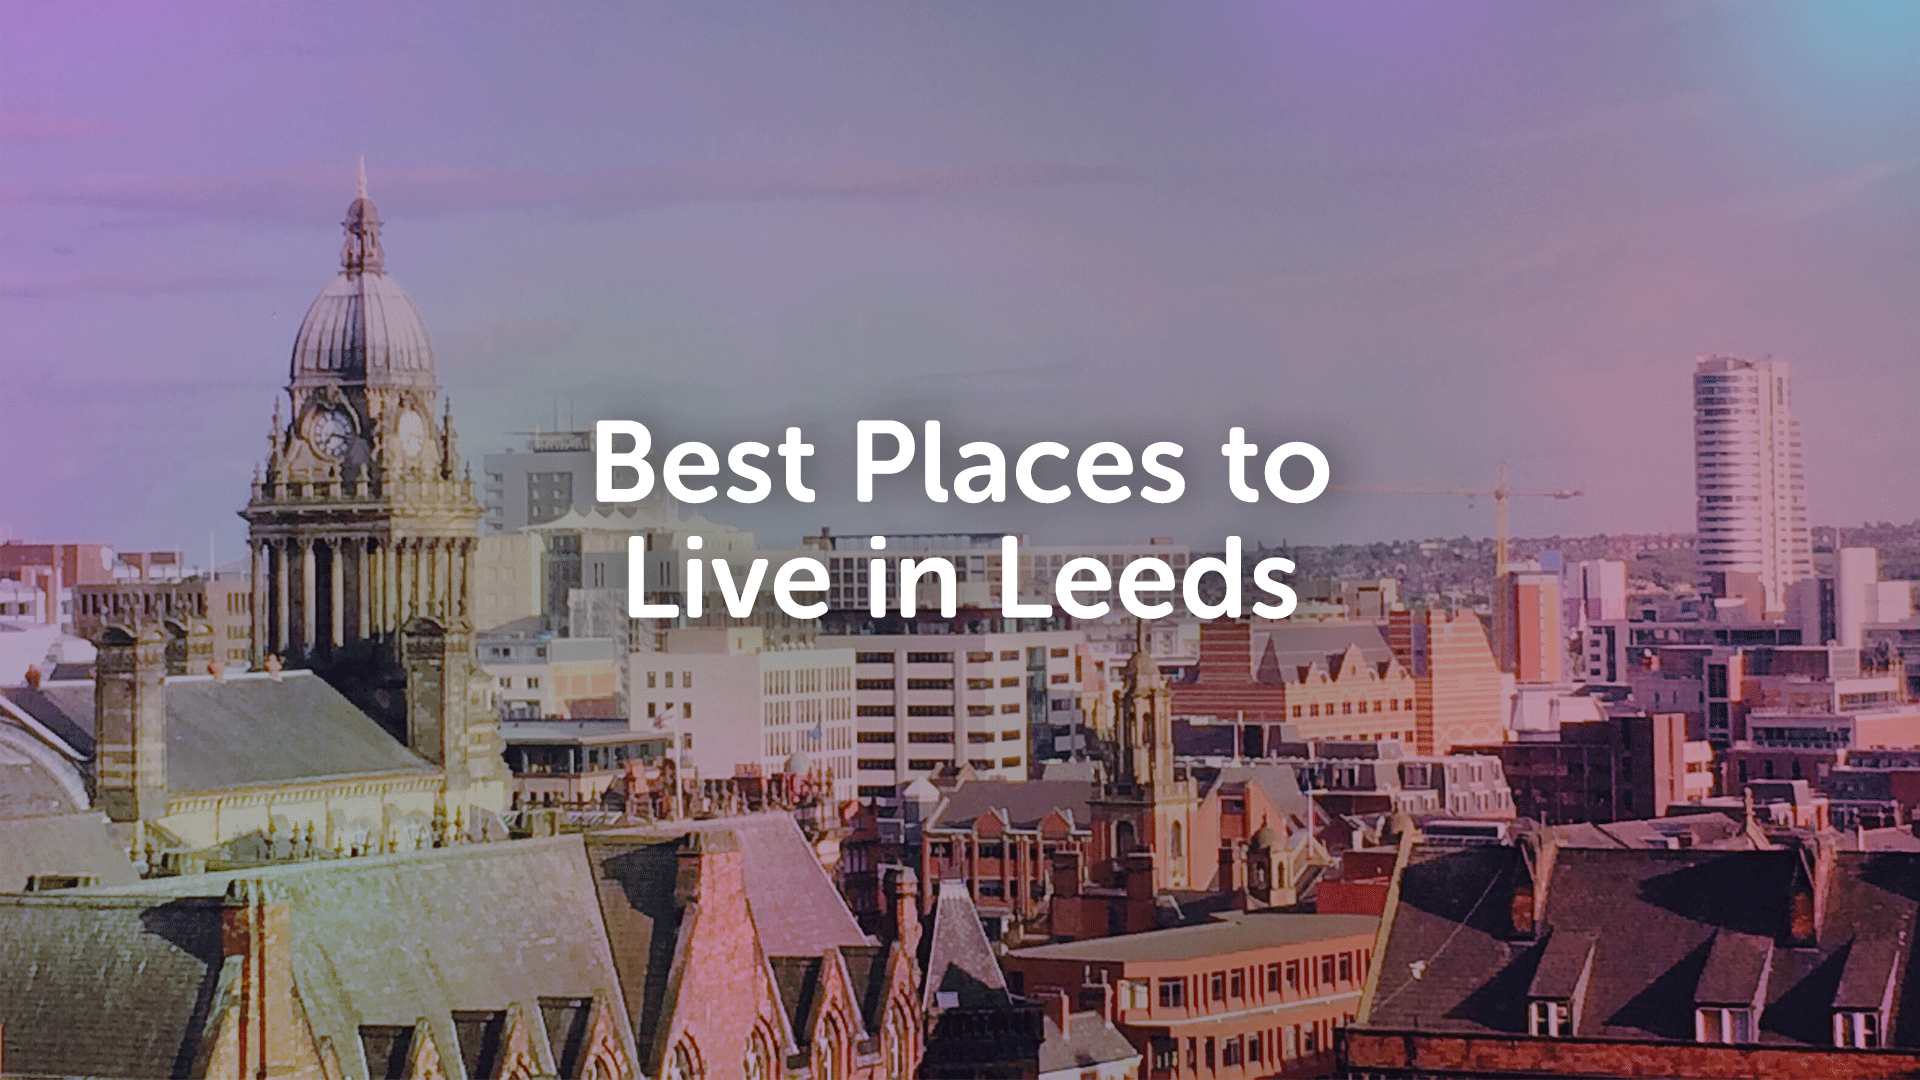 What are the 7 best places to live in Leeds?